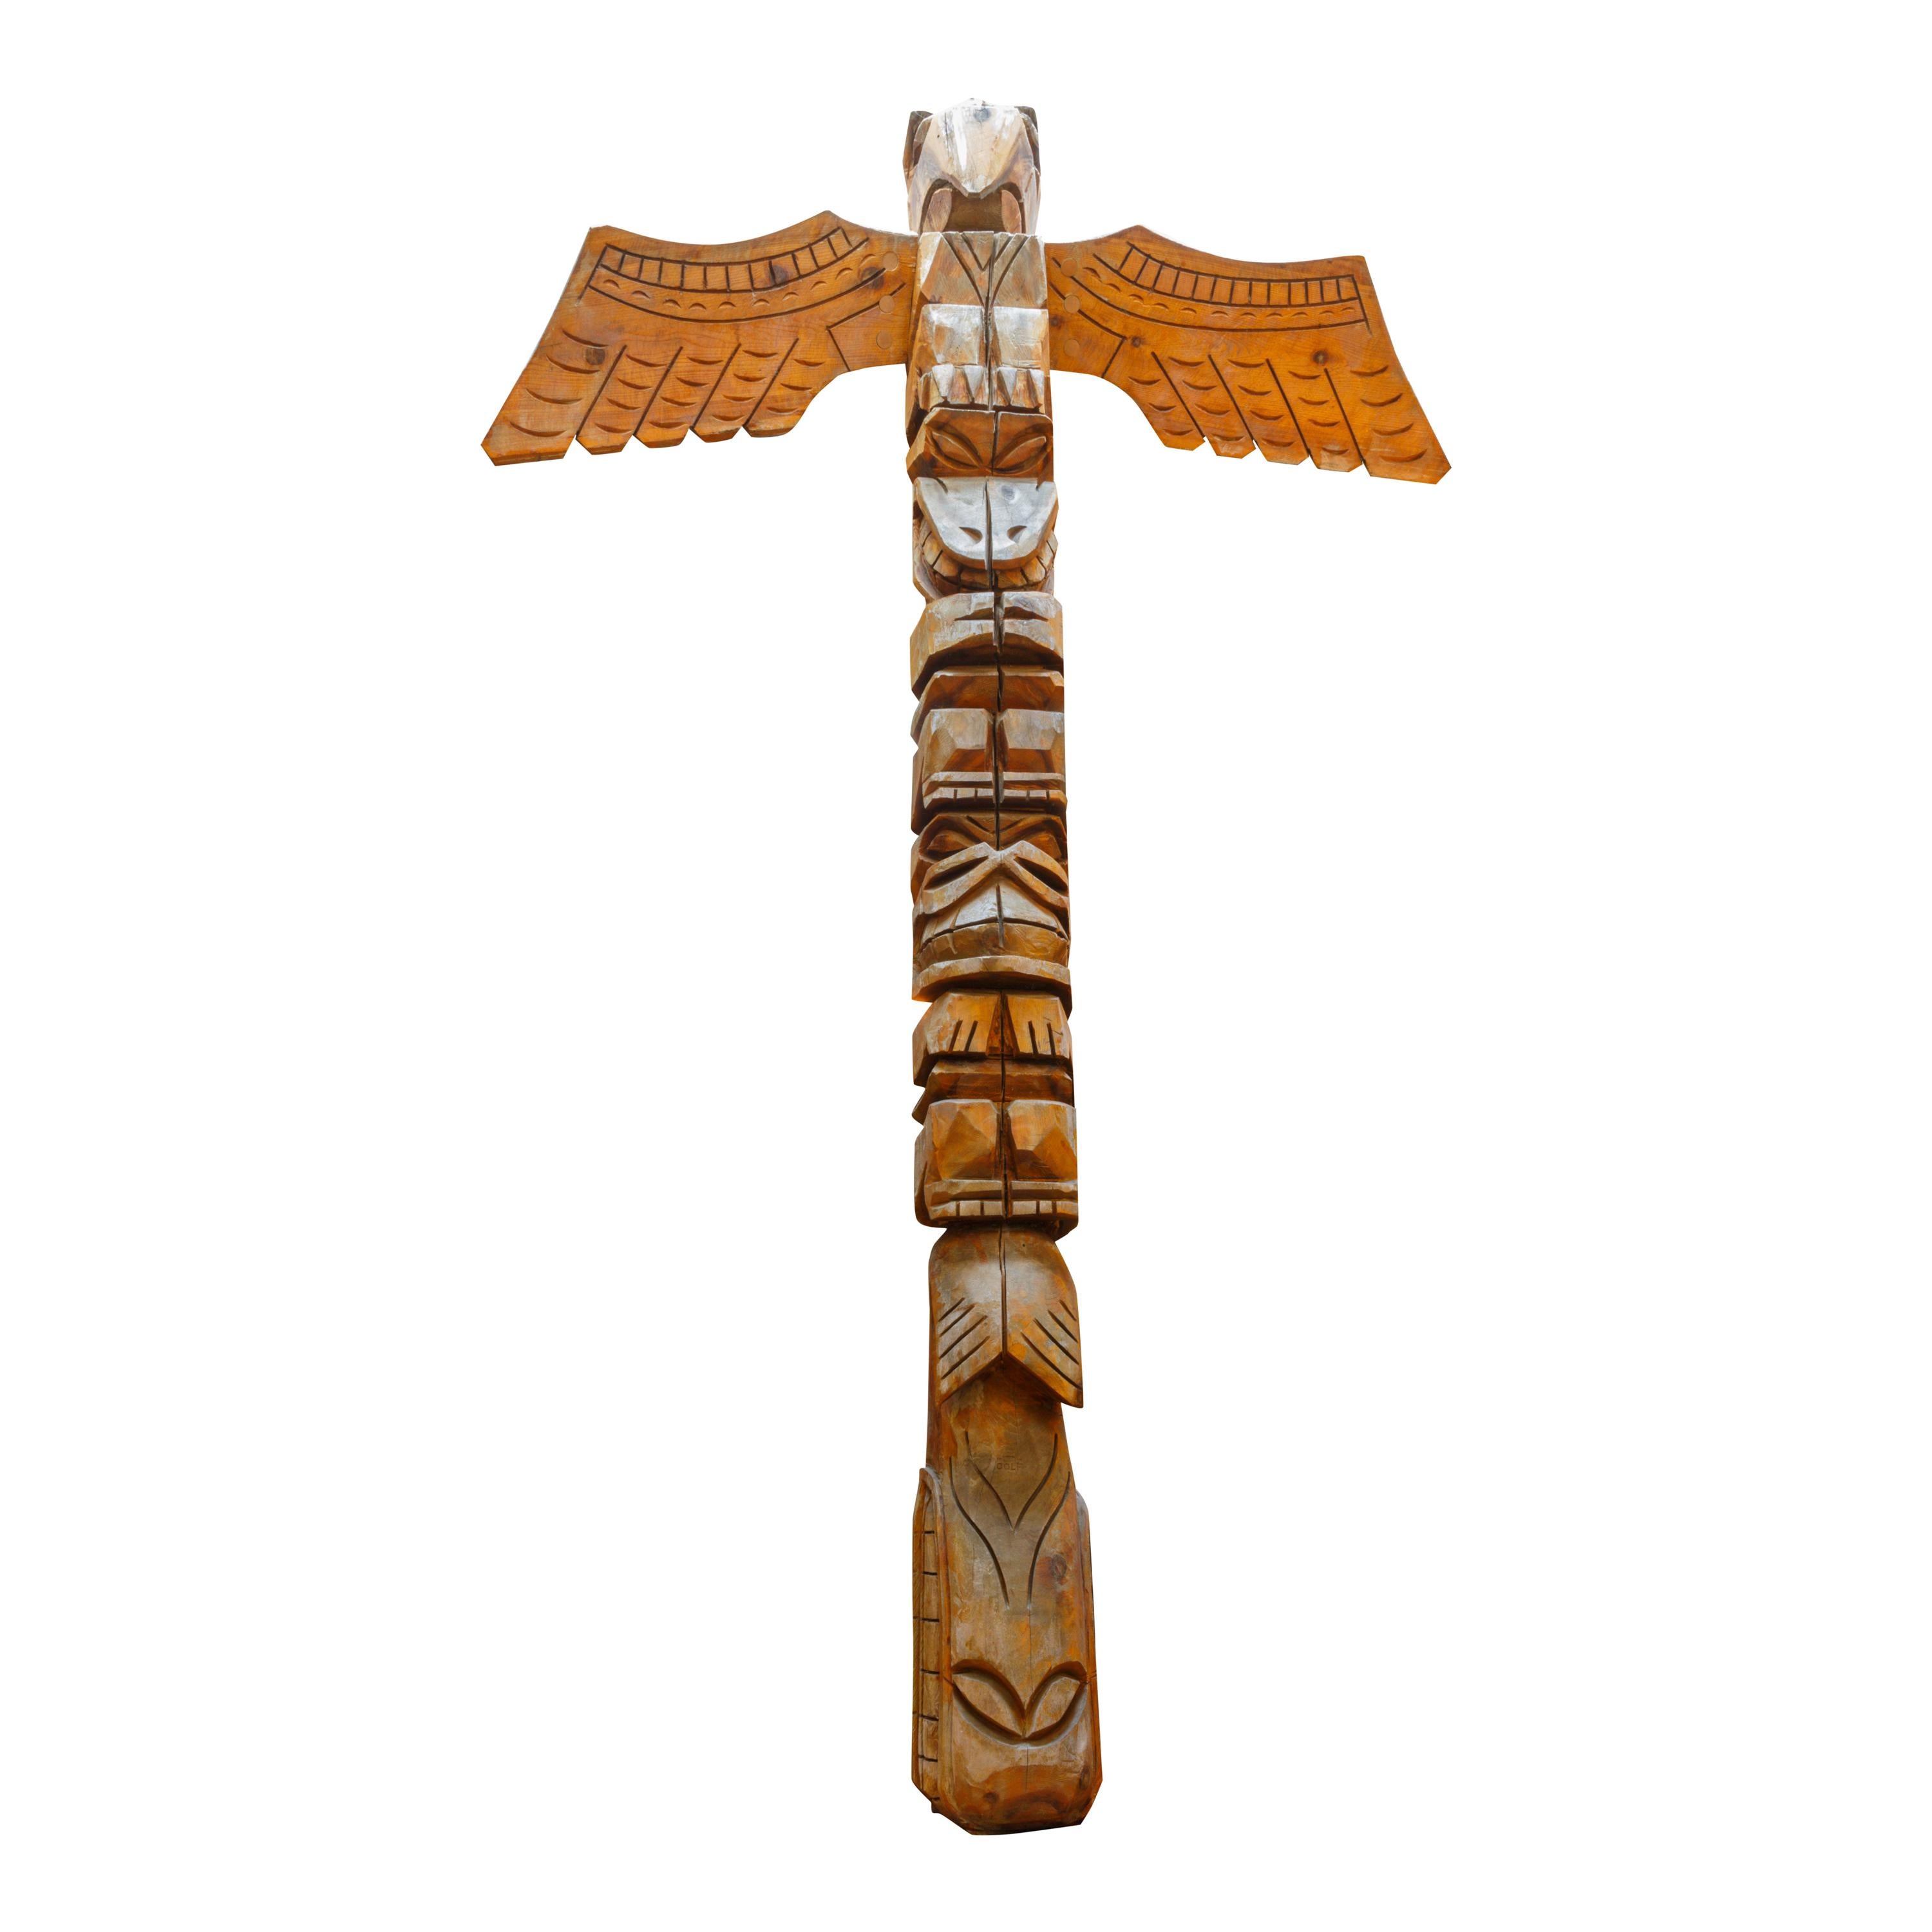 13' Vancouver Island TOTEM by Don Colp 158"H For Sale